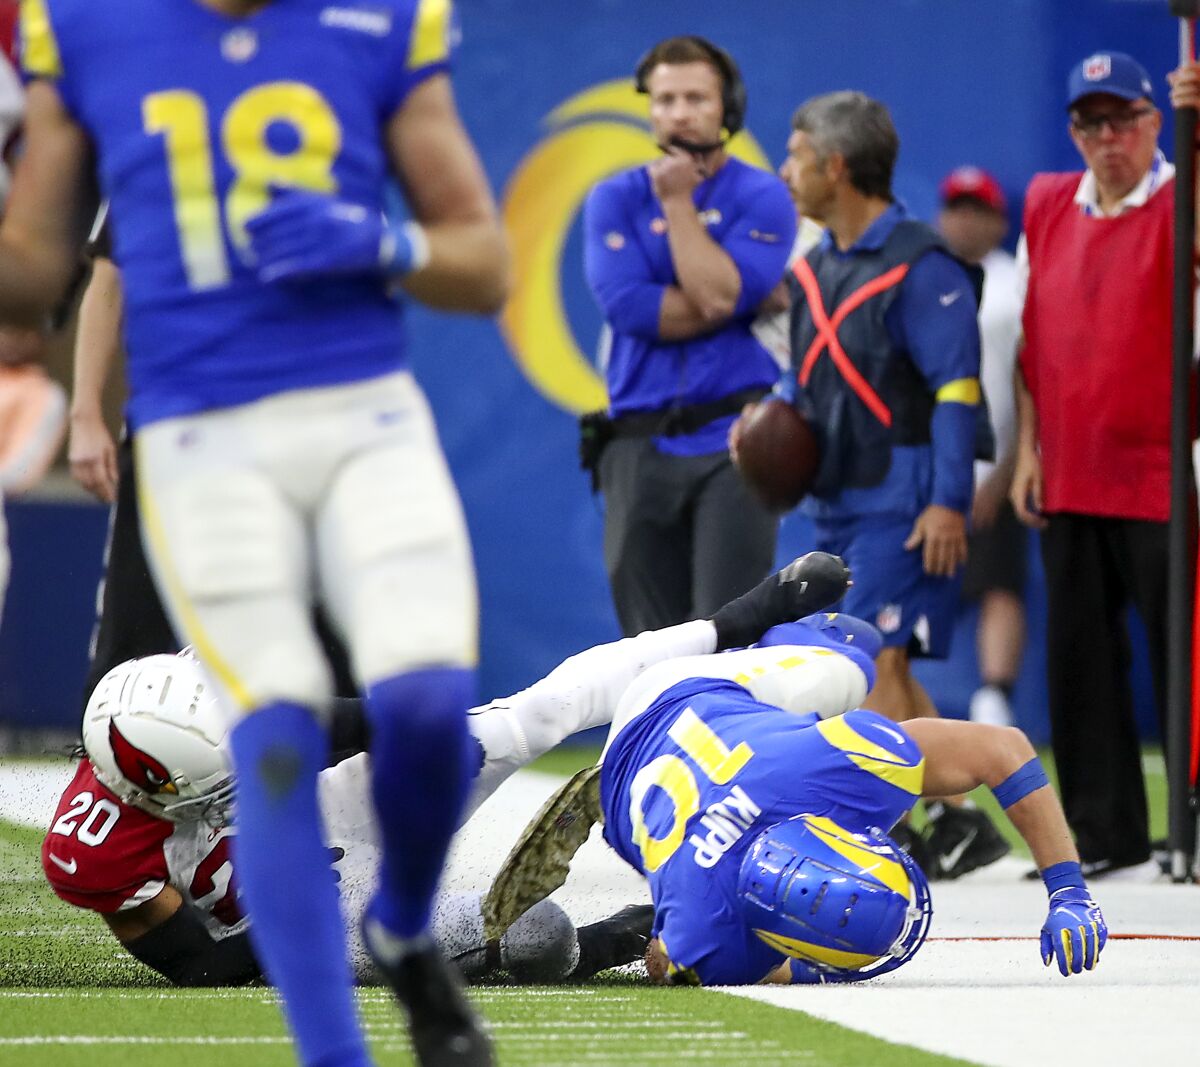 Cooper Kupp rolls out of bounds after Cardinals corner Marco Wilson landed on the receiver's leg and injured the receiver.